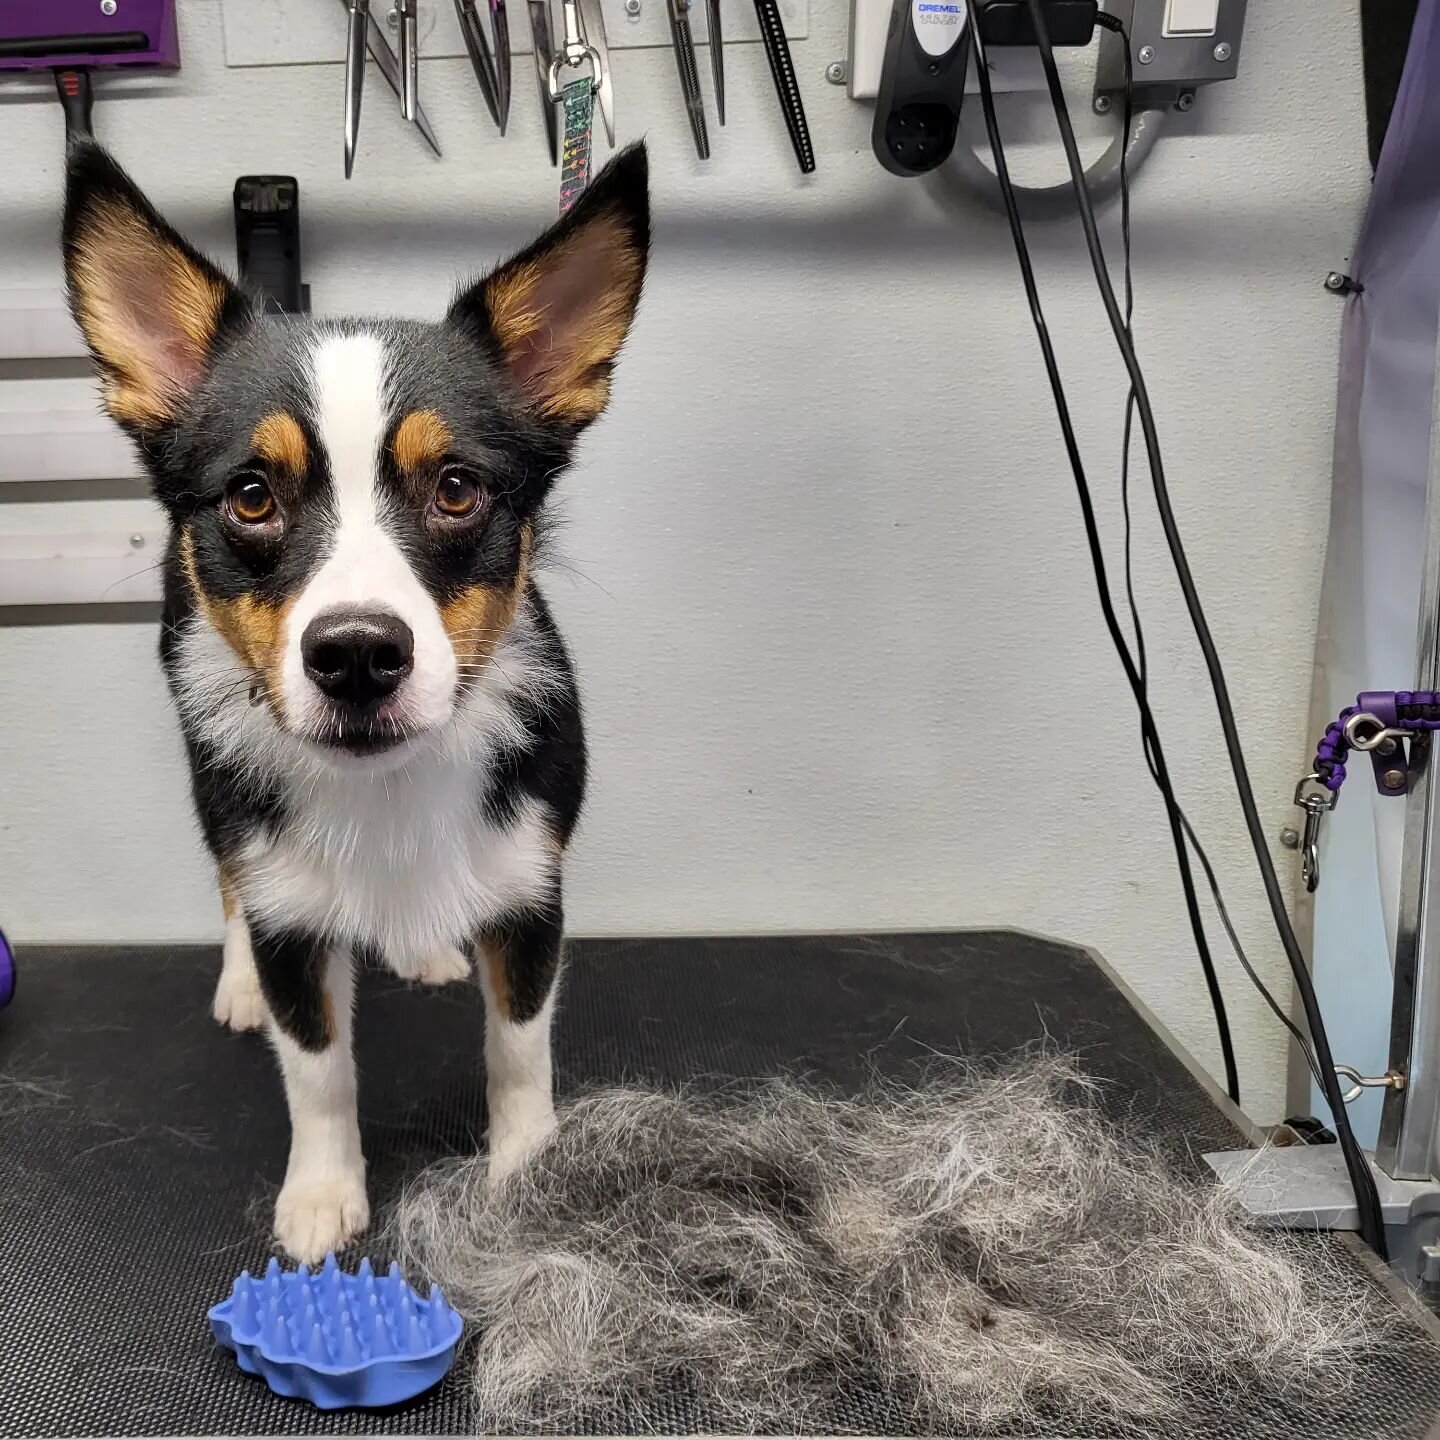 Kora's pretty proud of her pile of hair! and that wasn't even all of it!
 
.
.
#doggroomer #mobilegrooming #groominglife #groomersofinstagram  #dogsofinstagram #instadog